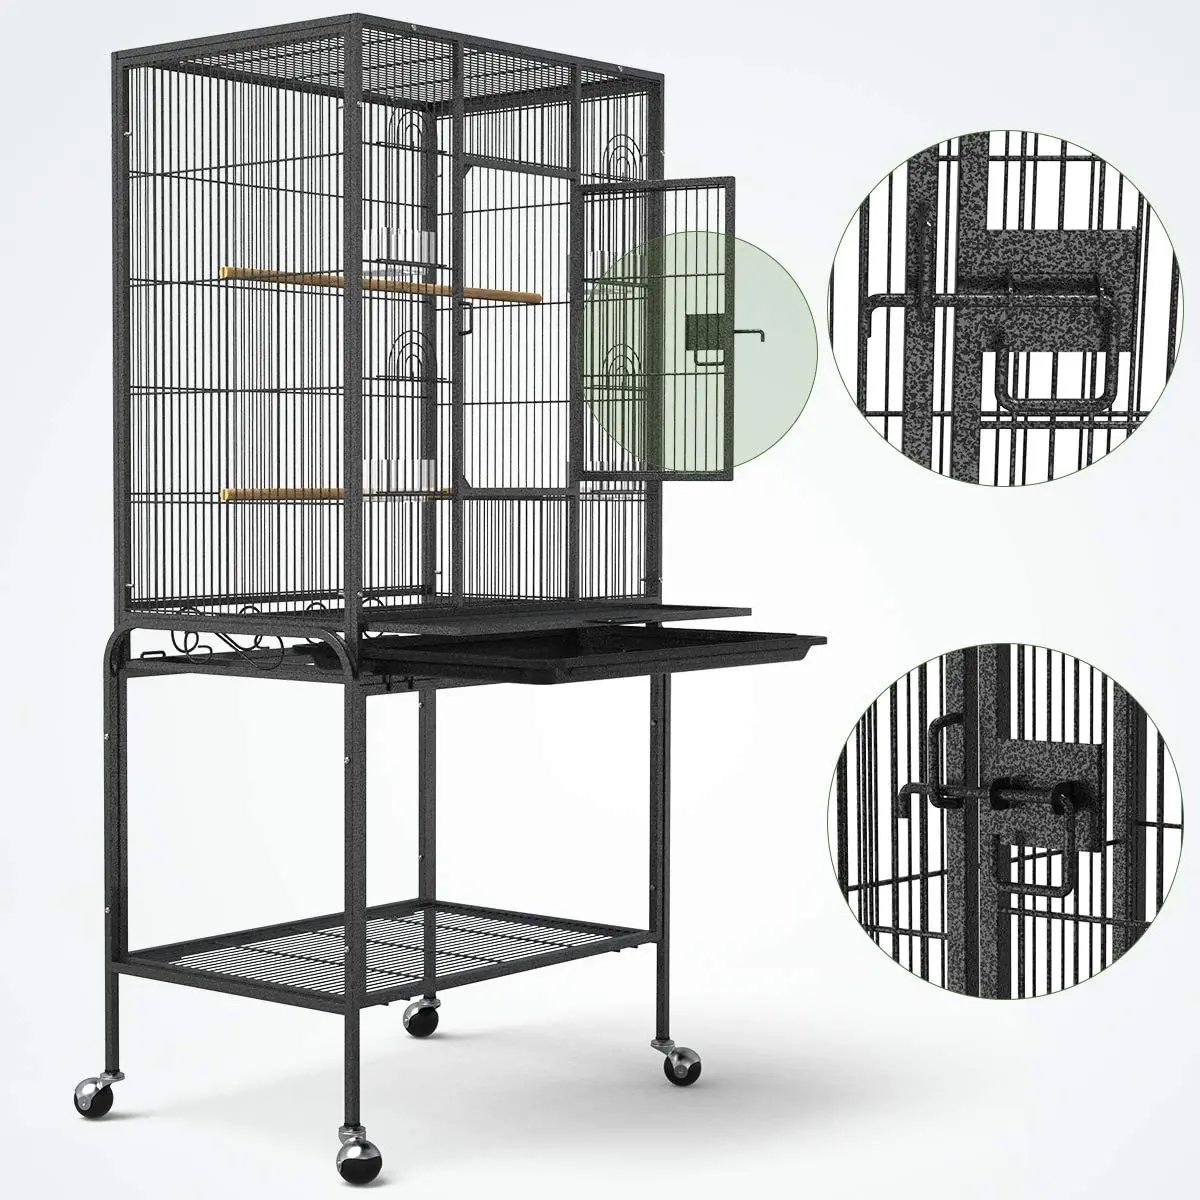 Manufacturer China bird cages for sale birds canary pigeon breeding cages